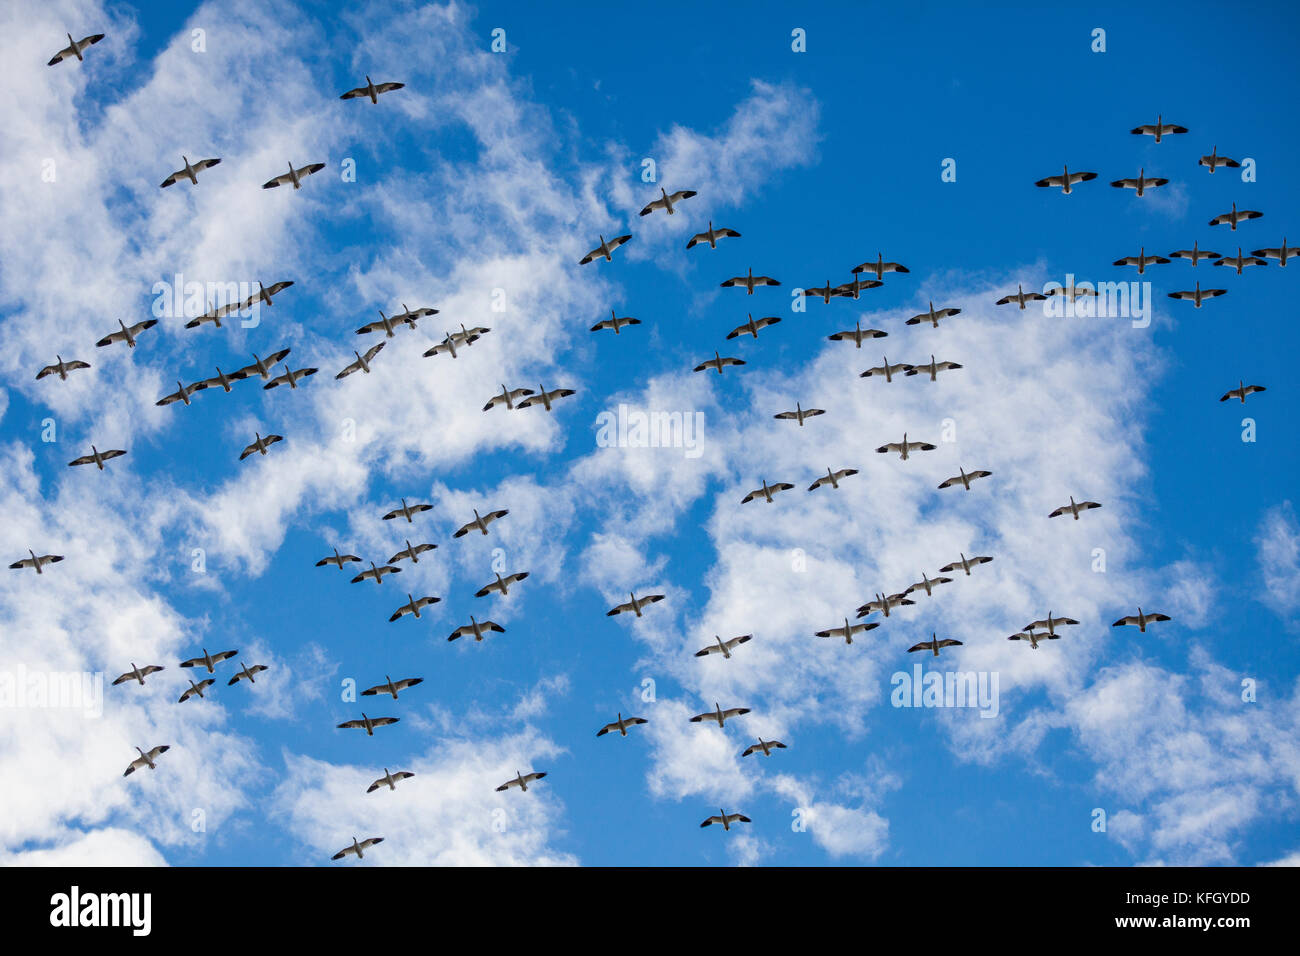 WA14231-00...WASHINGTON - Snow geese in flight over the Skaget Valley. Stock Photo